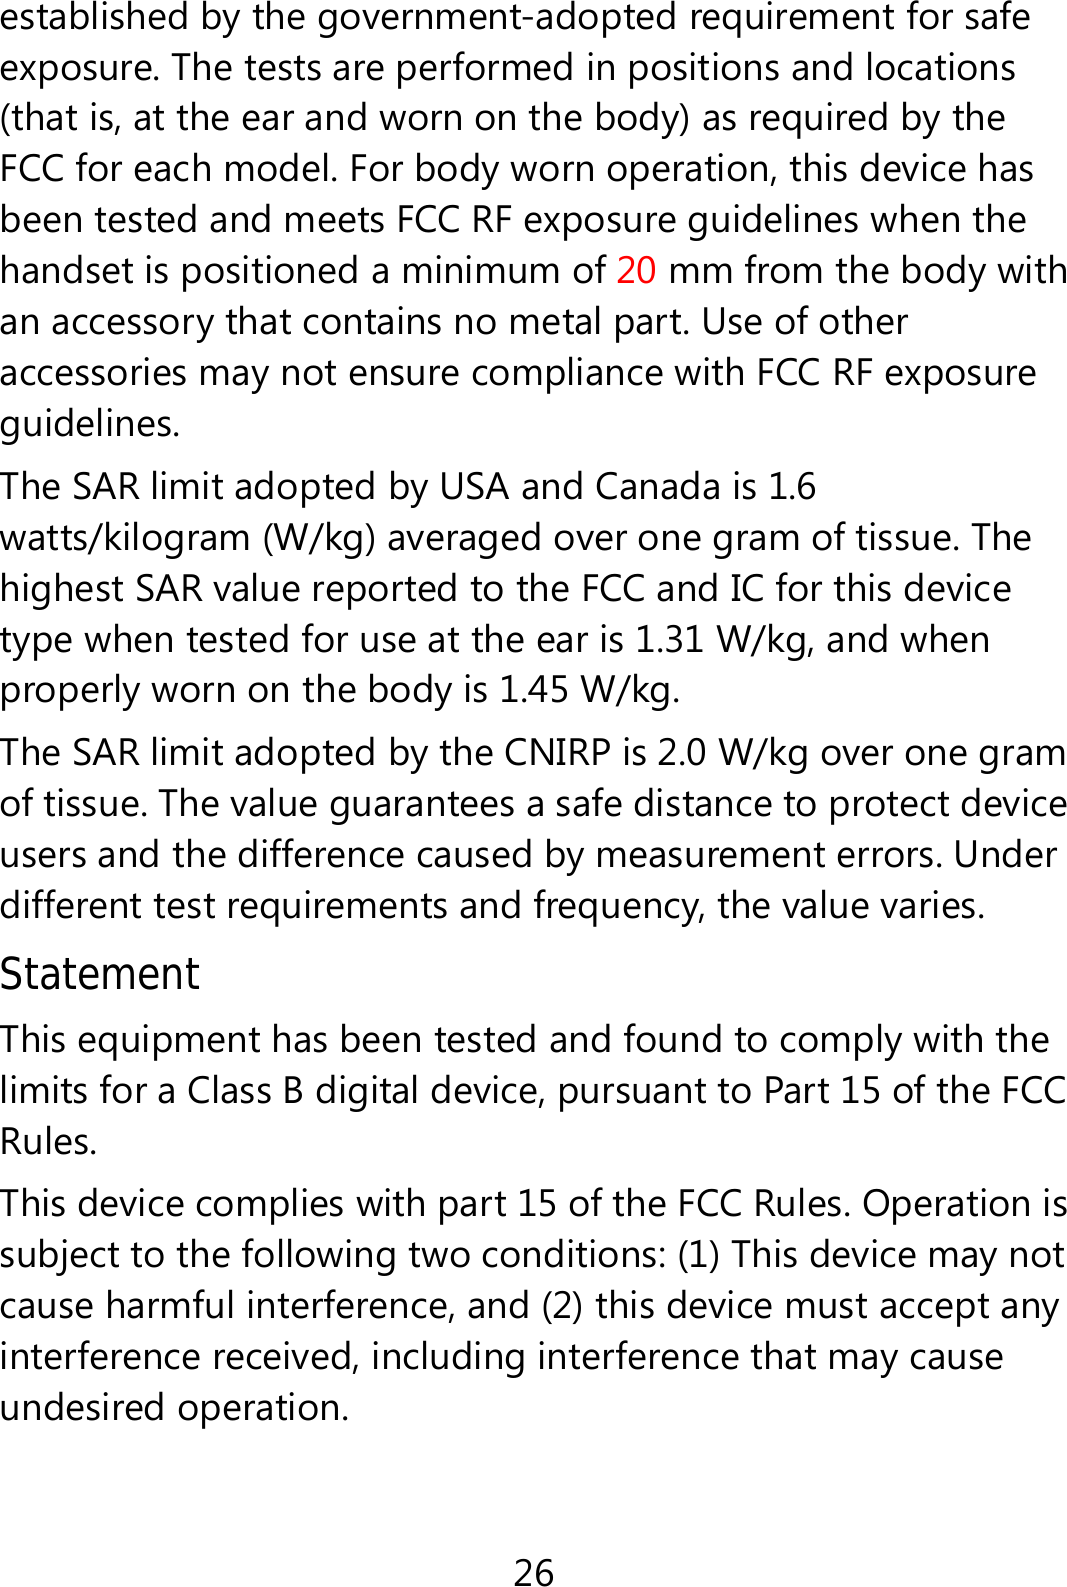 26 established by the government-adopted requirement for safe exposure. The tests are performed in positions and locations (that is, at the ear and worn on the body) as required by the FCC for each model. For body worn operation, this device has been tested and meets FCC RF exposure guidelines when the handset is positioned a minimum of 20 mm from the body with an accessory that contains no metal part. Use of other accessories may not ensure compliance with FCC RF exposure guidelines. The SAR limit adopted by USA and Canada is 1.6 watts/kilogram (W/kg) averaged over one gram of tissue. The highest SAR value reported to the FCC and IC for this device type when tested for use at the ear is 1.31 W/kg, and when properly worn on the body is 1.45 W/kg. The SAR limit adopted by the CNIRP is 2.0 W/kg over one gram of tissue. The value guarantees a safe distance to protect device users and the difference caused by measurement errors. Under different test requirements and frequency, the value varies.   Statement This equipment has been tested and found to comply with the limits for a Class B digital device, pursuant to Part 15 of the FCC Rules.  This device complies with part 15 of the FCC Rules. Operation is subject to the following two conditions: (1) This device may not cause harmful interference, and (2) this device must accept any interference received, including interference that may cause undesired operation. 